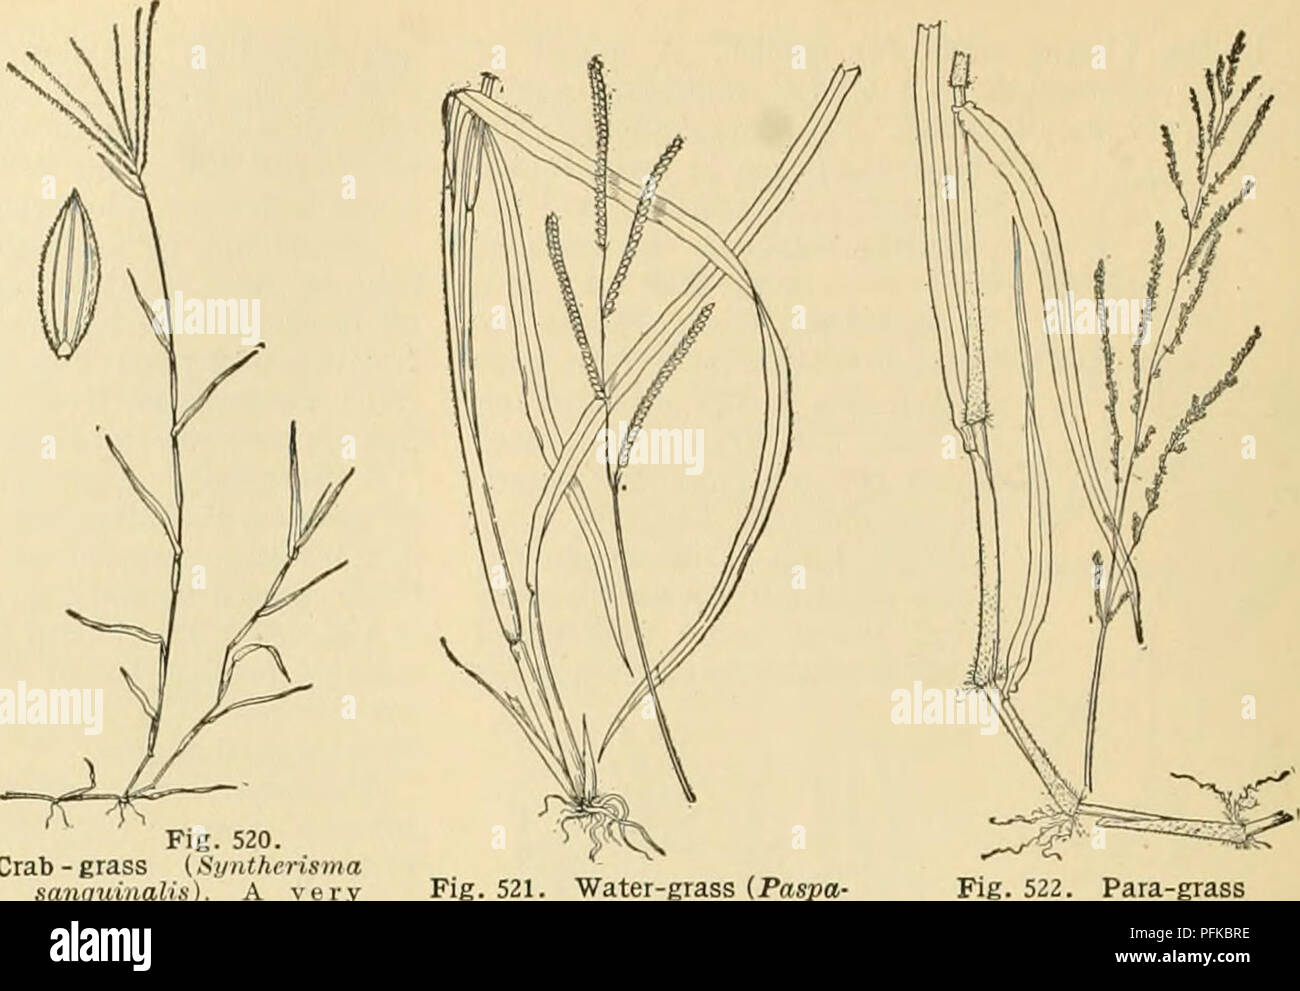 . Cyclopedia of farm crops. Farm produce; Agriculture. Fig. 519. Sorghum iSorghuin vithjare).. Fig. 520. Crab-grass (Suntherisma sanguinalis). A very common weedy grass. , 521. Water-grass (Paspa- Imii iliUttitlttiii). Fig. 522. Para-grass {Panii'uiit molle). with spikelets similar in structure to tho-se of Panicum but arranged in one-sided, more or less digitate spikes. Considered by many as a section (Digitaria) of Panicum. sanguinalis, Dulac. Crab-grass. (Fig. 520.) A well-known annual weed common in cultivated soil, especially in the South. A native of the Old World. The stems reach a heig Stock Photo